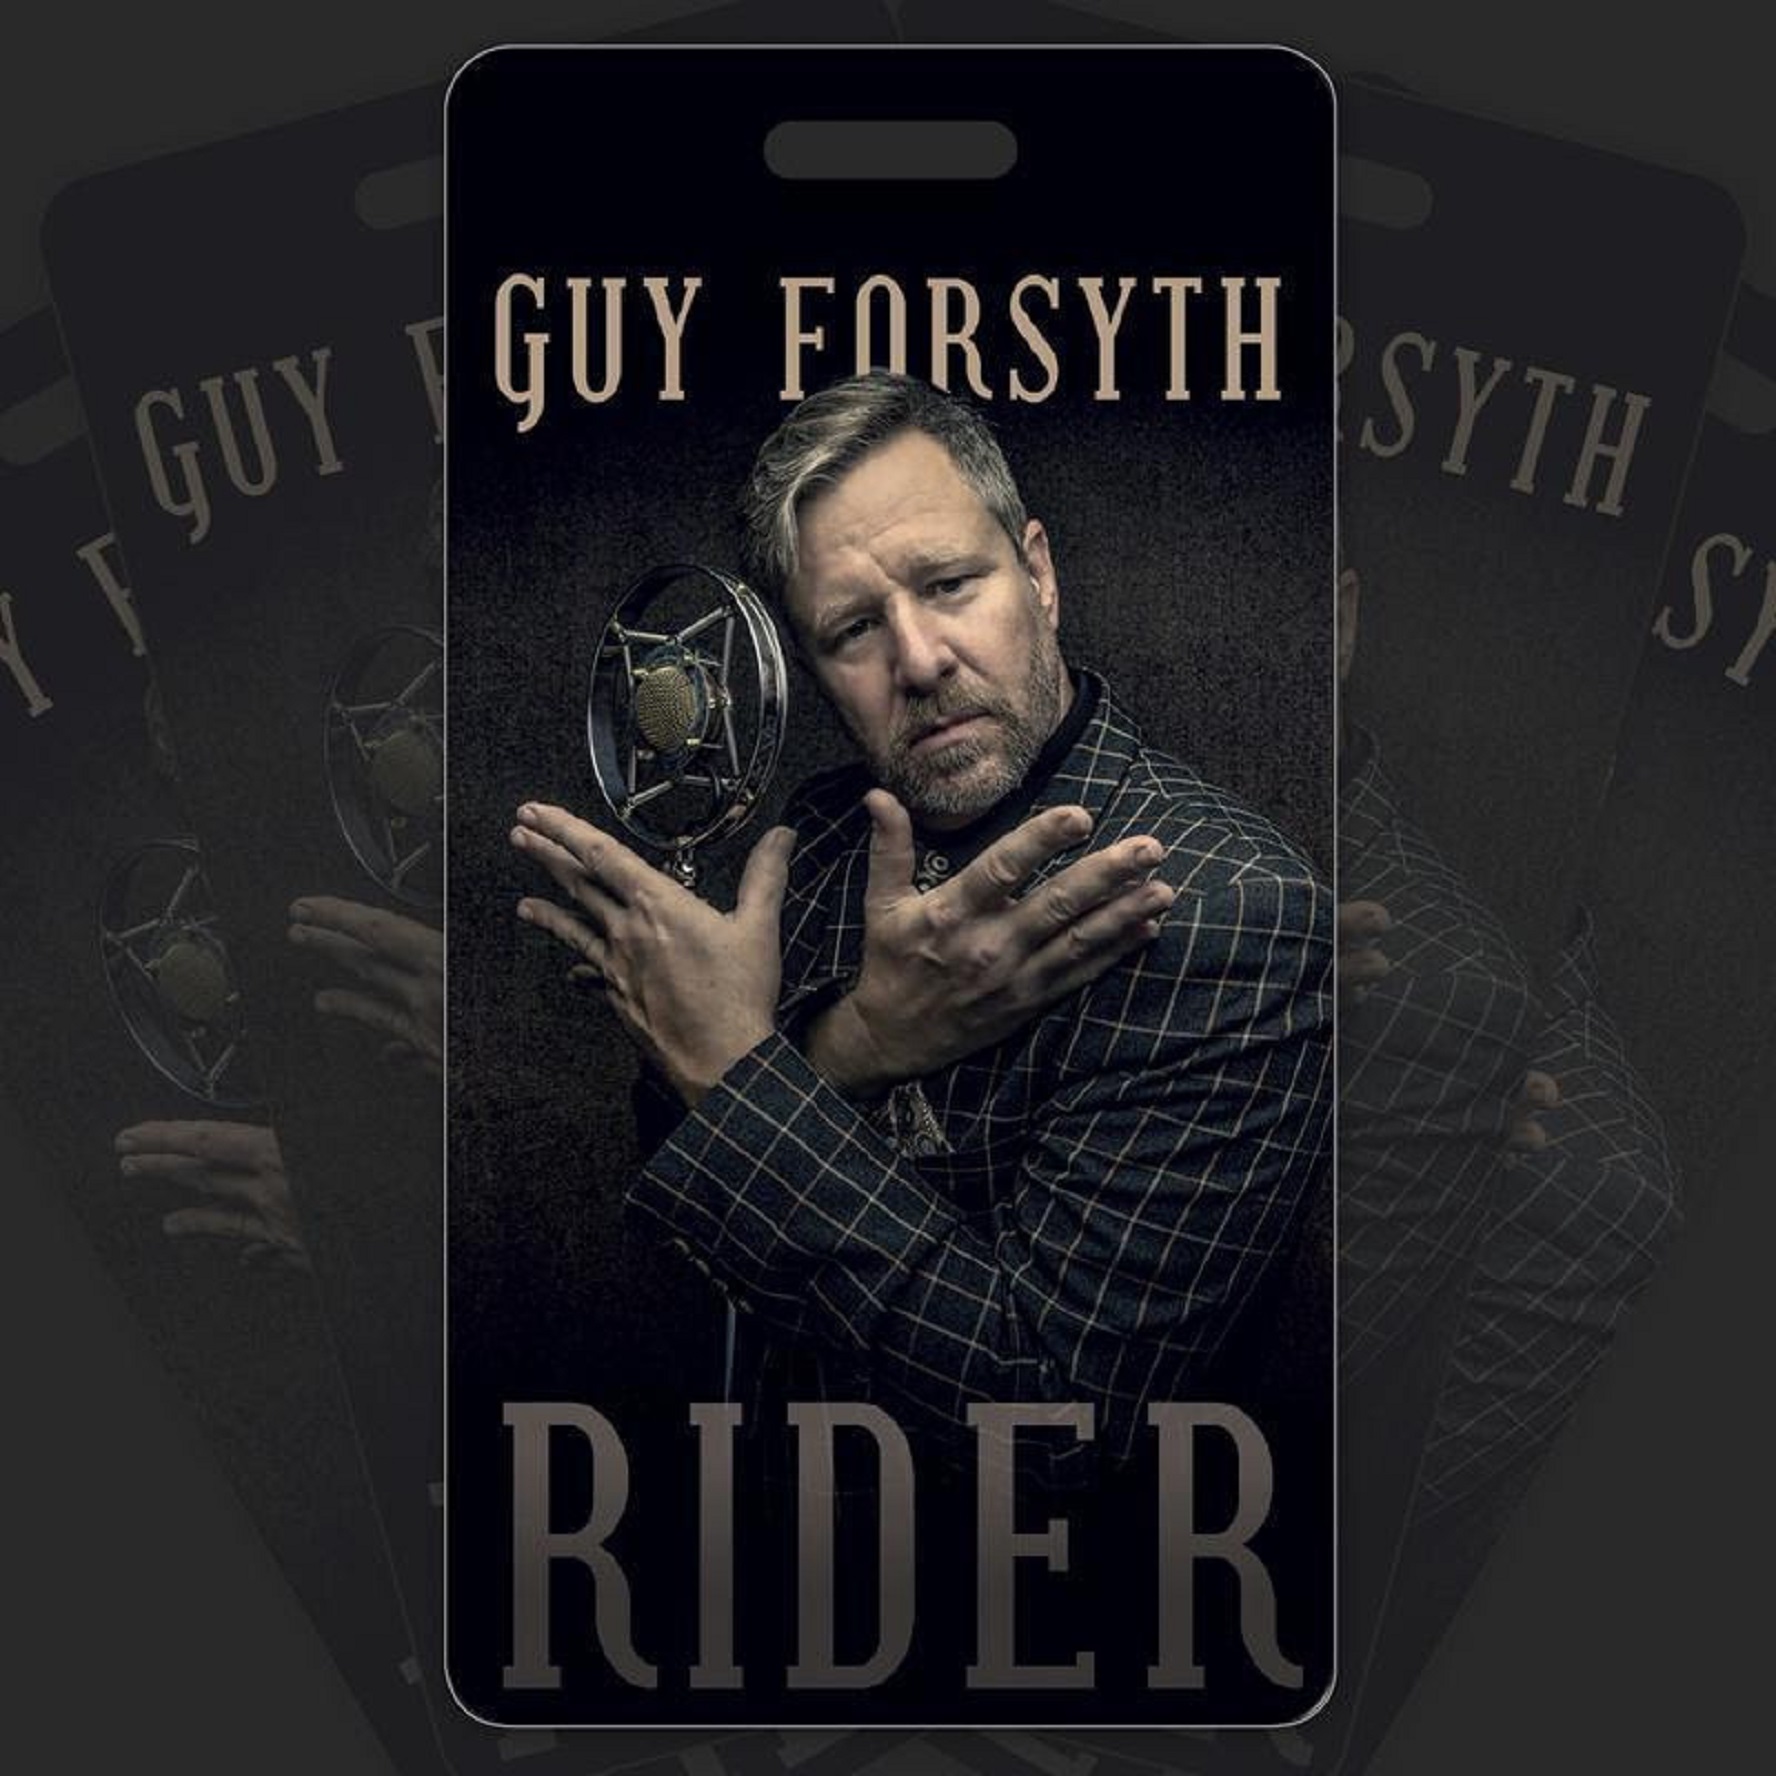 Guy Forsyth Releases New EP, 'Rider,' with Vortex show on Nov. 4